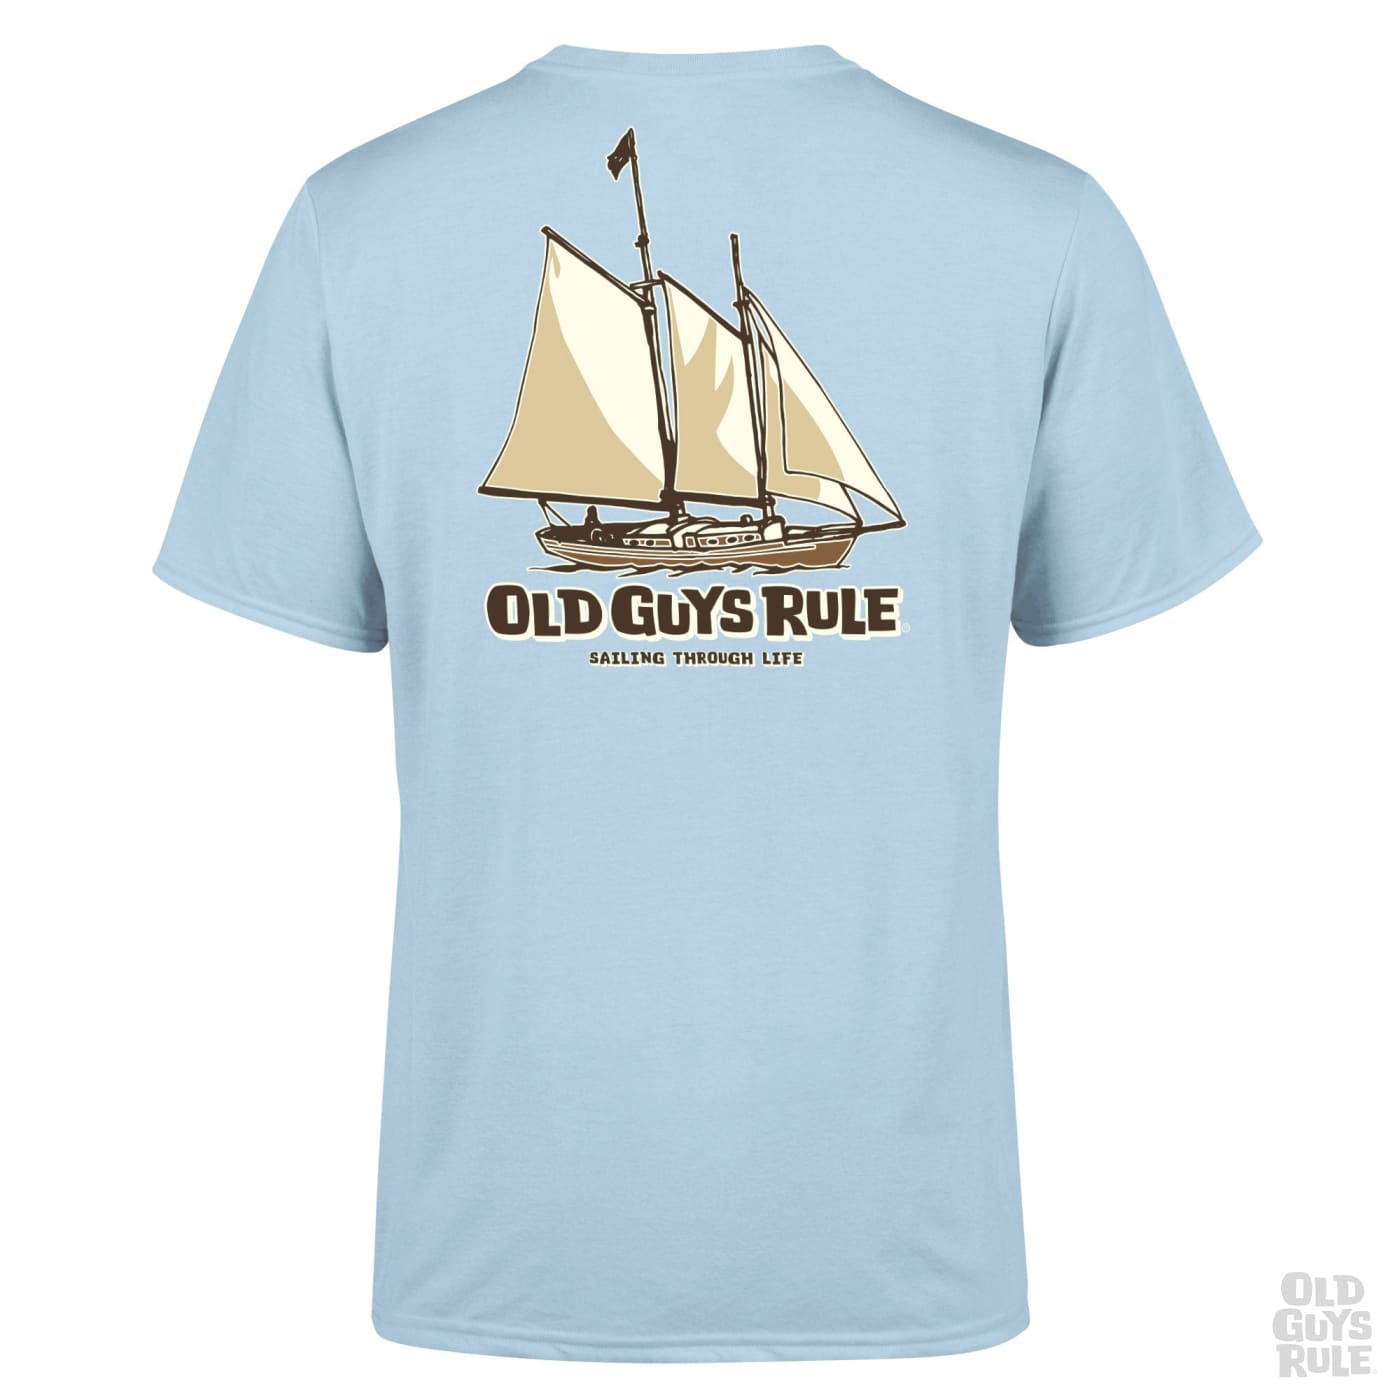 Coastal T-Shirt Collection - Old Guys Rule